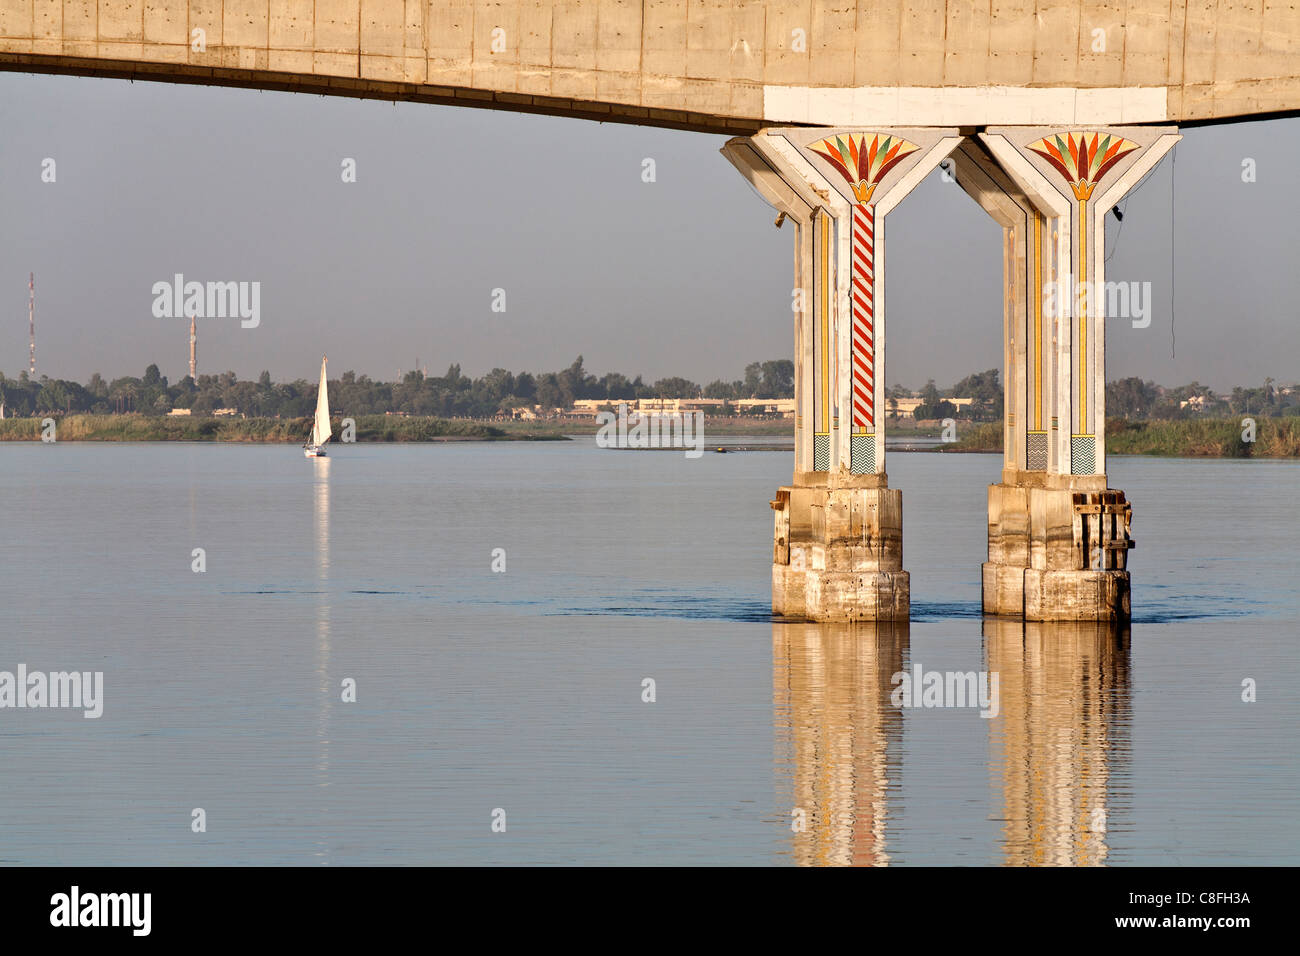 Two decorated pillars of Luxor bridge seen from the middle of the Nile reflected in calm water,with distant felucca, Egypt, Stock Photo